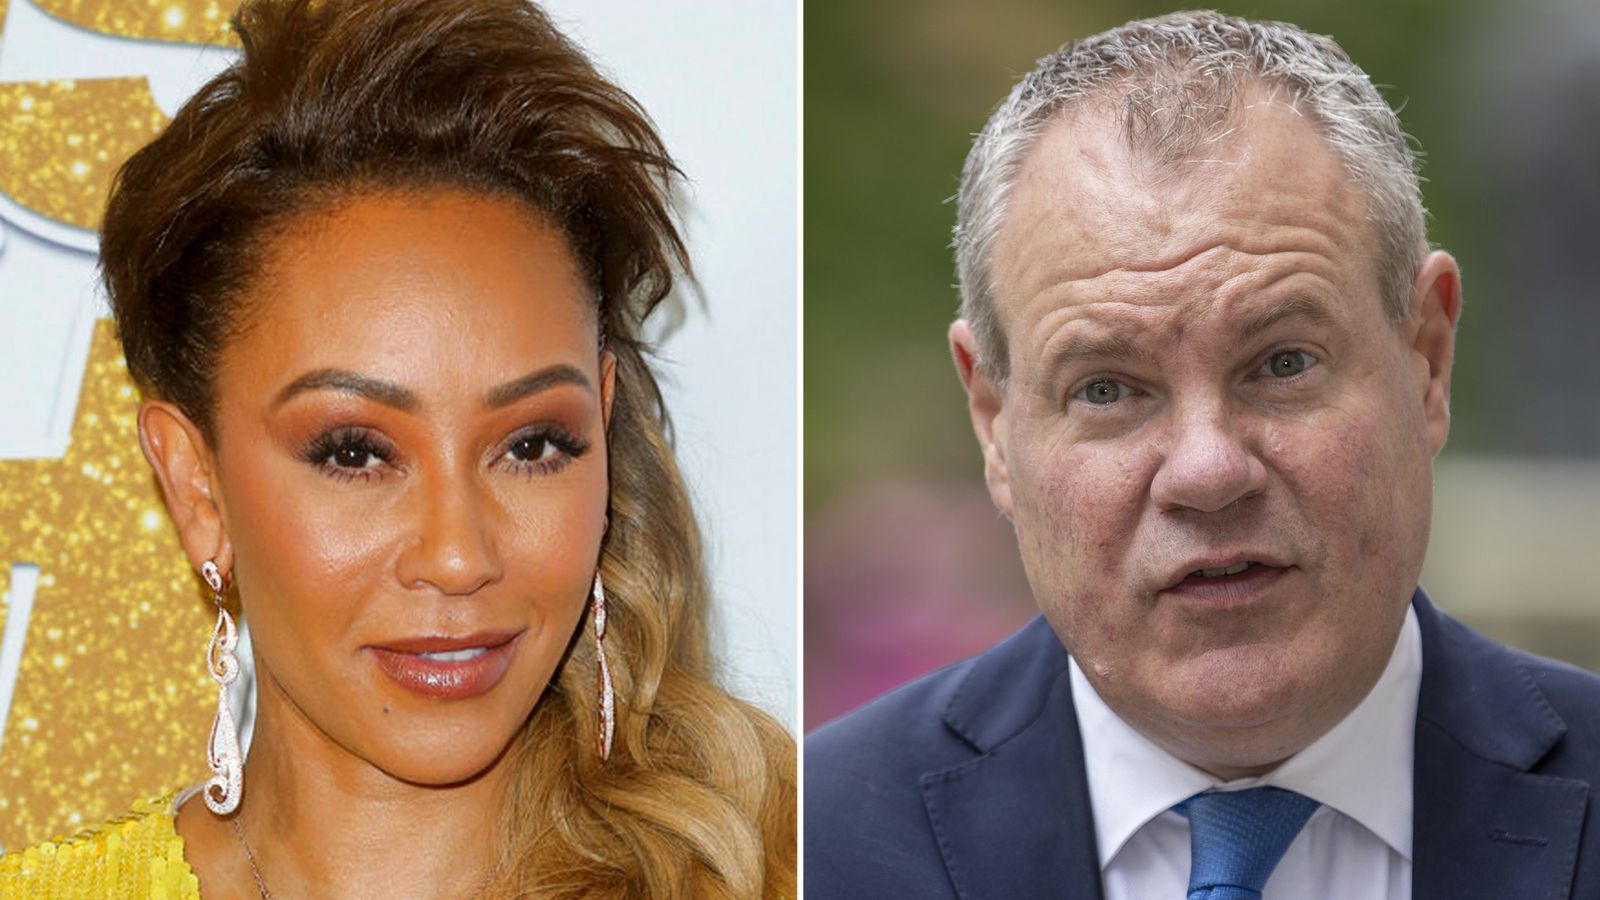 Sacked trade minister Conor Burns denies ever meeting singer Mel B after claims he made remarks to her in lift